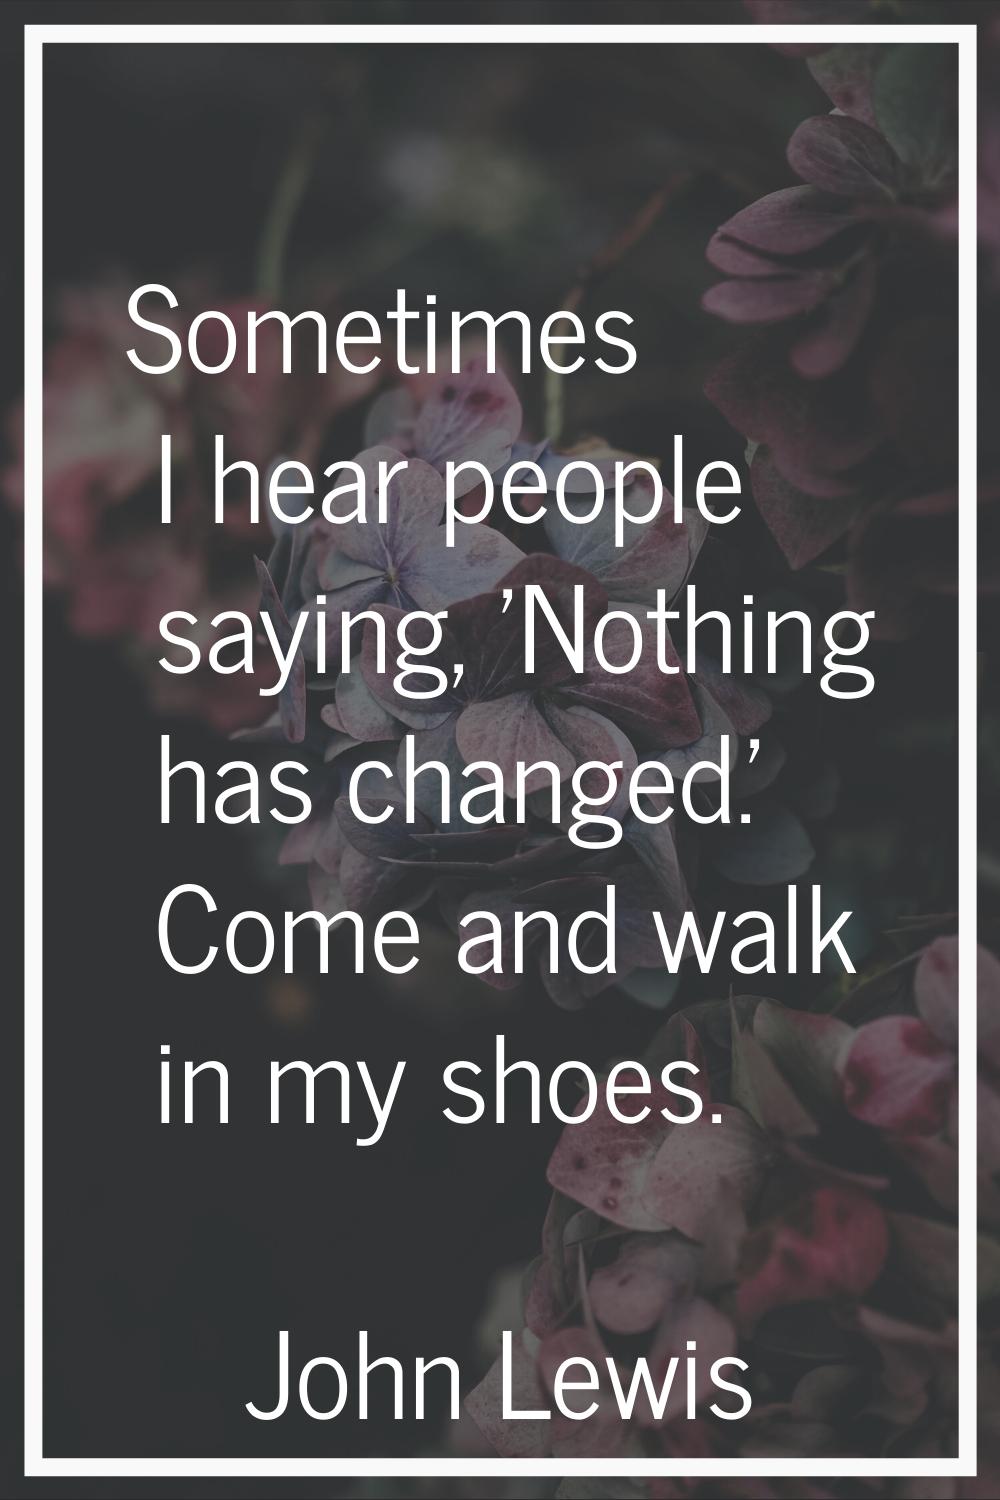 Sometimes I hear people saying, 'Nothing has changed.' Come and walk in my shoes.